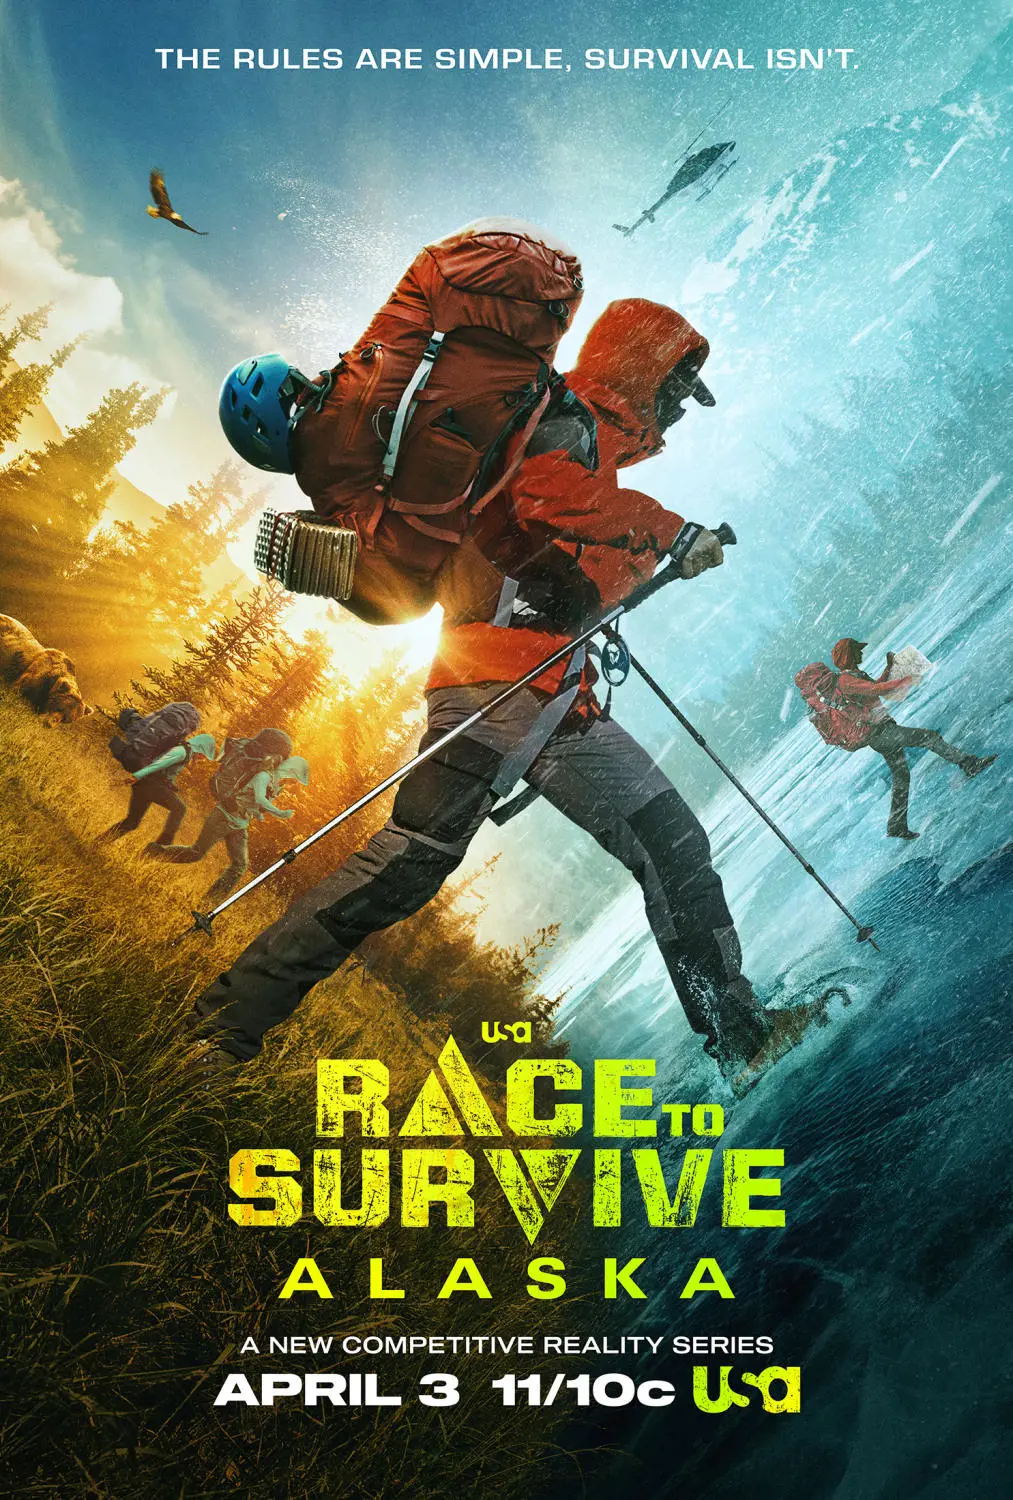 Race to Survive Alaska generated decent viewership in the first season leading to a potential for next season